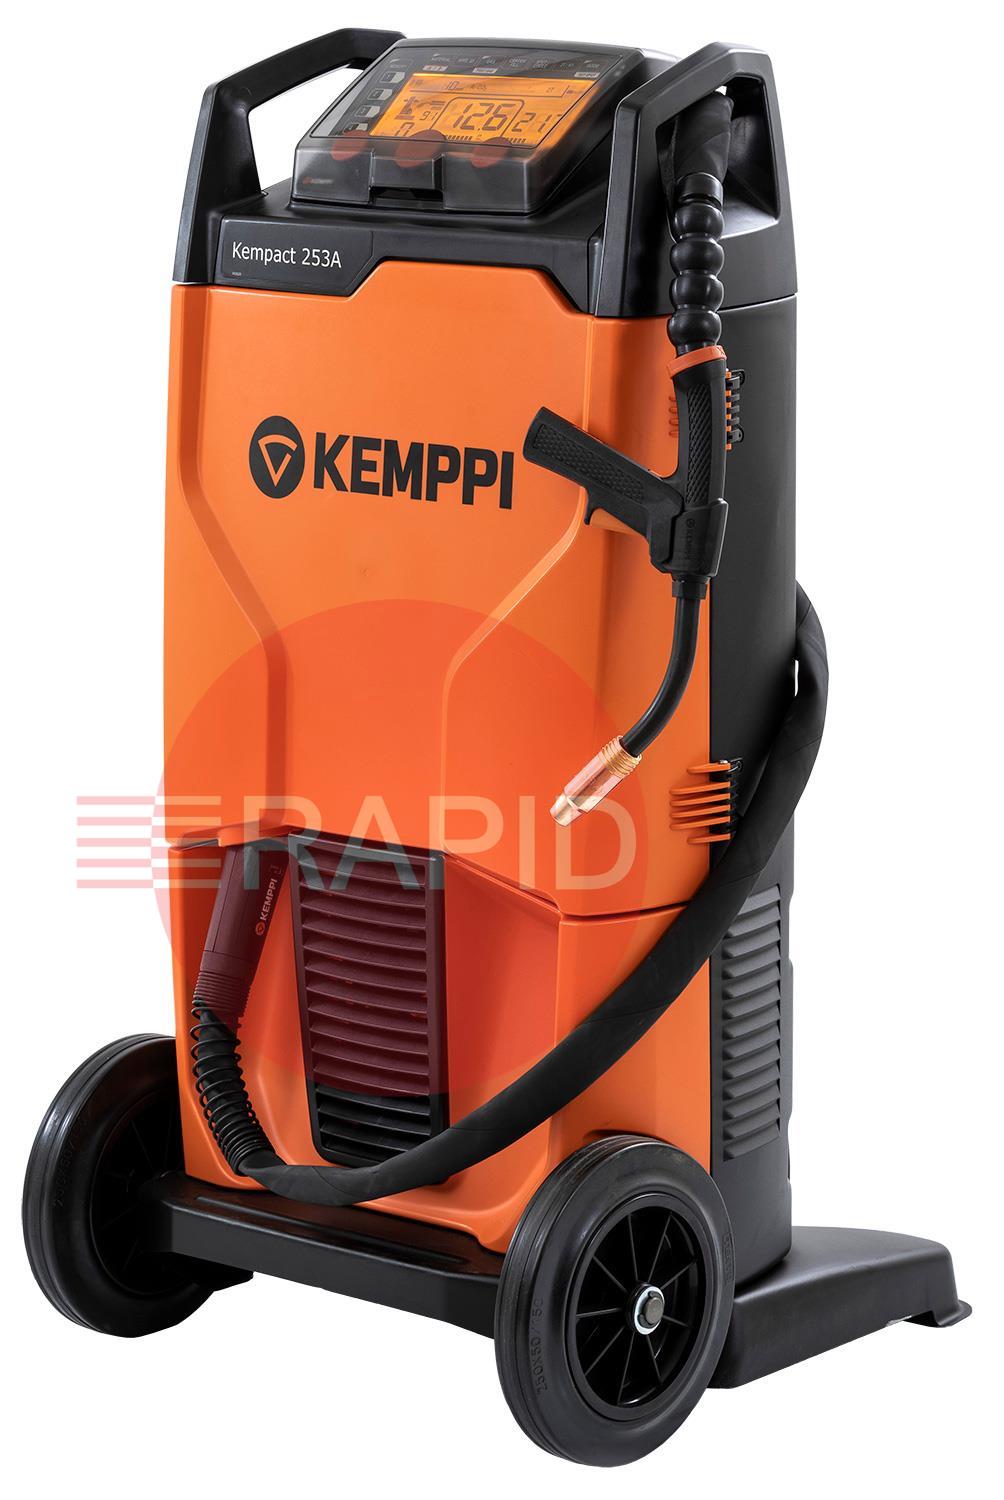 P2209GXE  Kemppi Kempact RA 253A, 250A 3 Phase 400v Mig Welder, with Flexlite GXe 305G 3.5m Torch